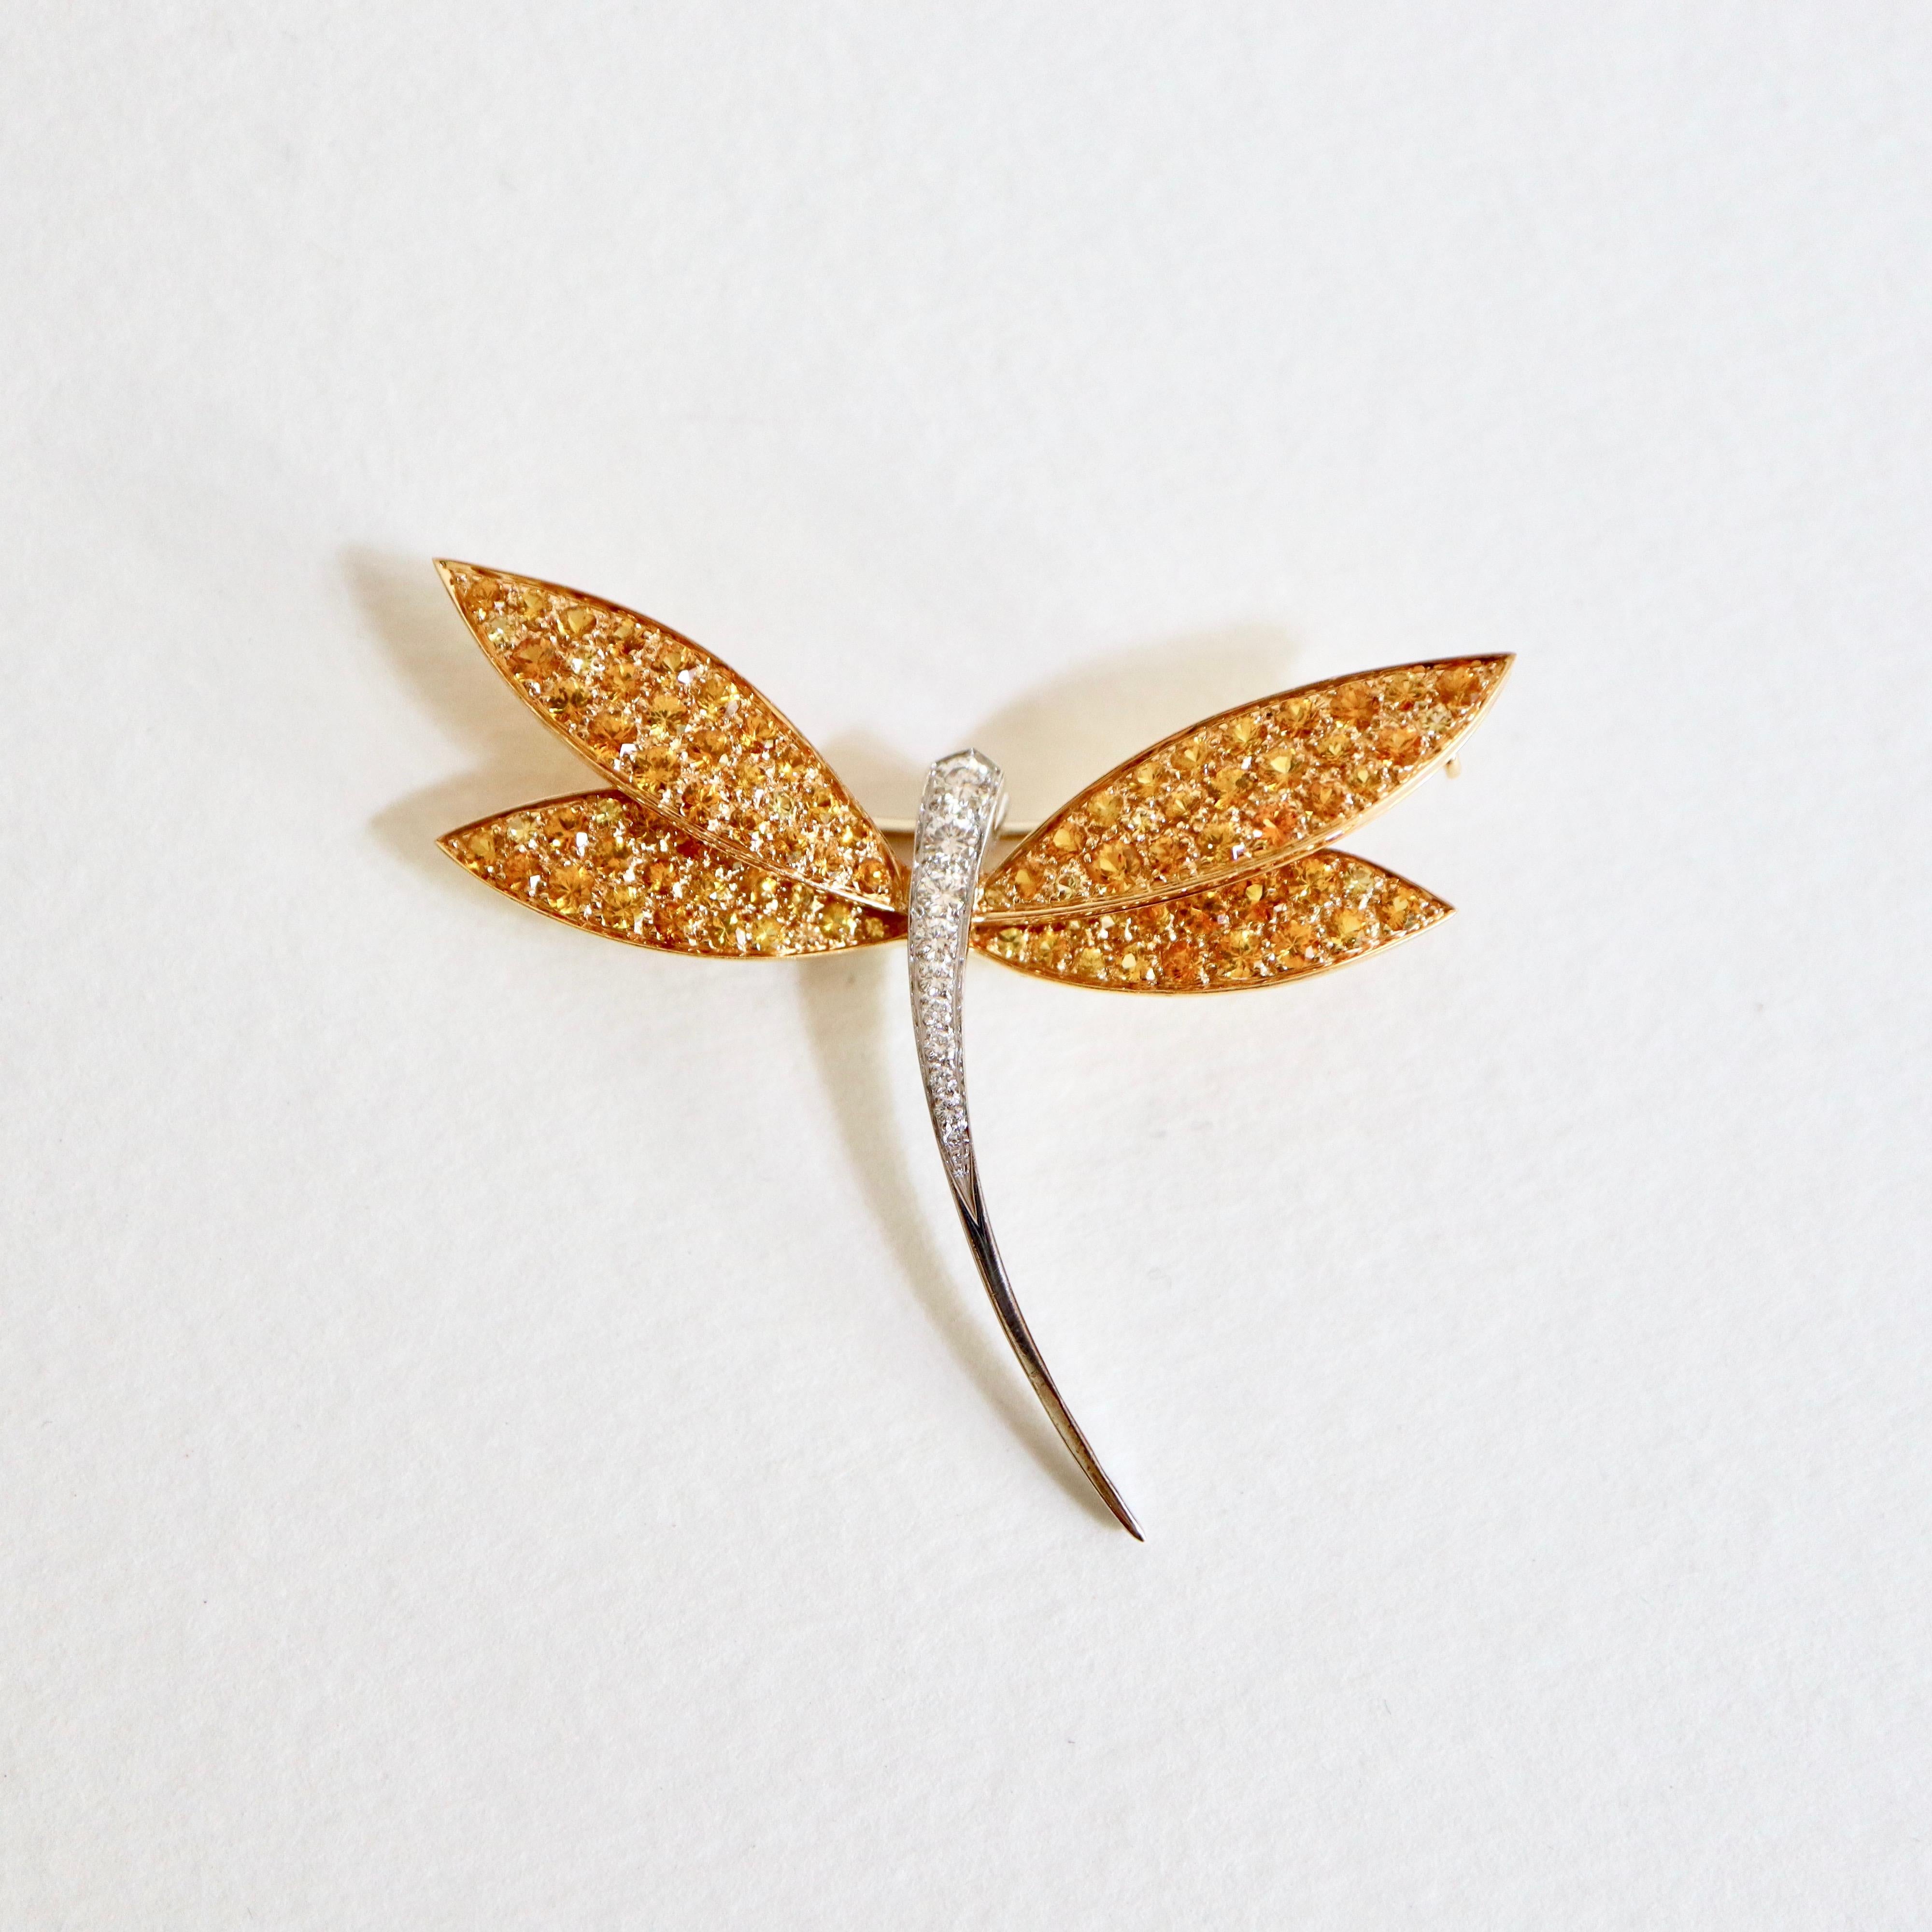 VAN CLEEF & ARPELS 18 carat White gold and 18 carat yellow Gold Dragonfly Brooch, Yellow Sapphires and Diamonds.
Brooch VAN CLEEF & ARPELS Dragonfly, the Body in 18 Carat white Gold is set with 9 Diamonds and the 18 Carat yellow Gold Wings are set